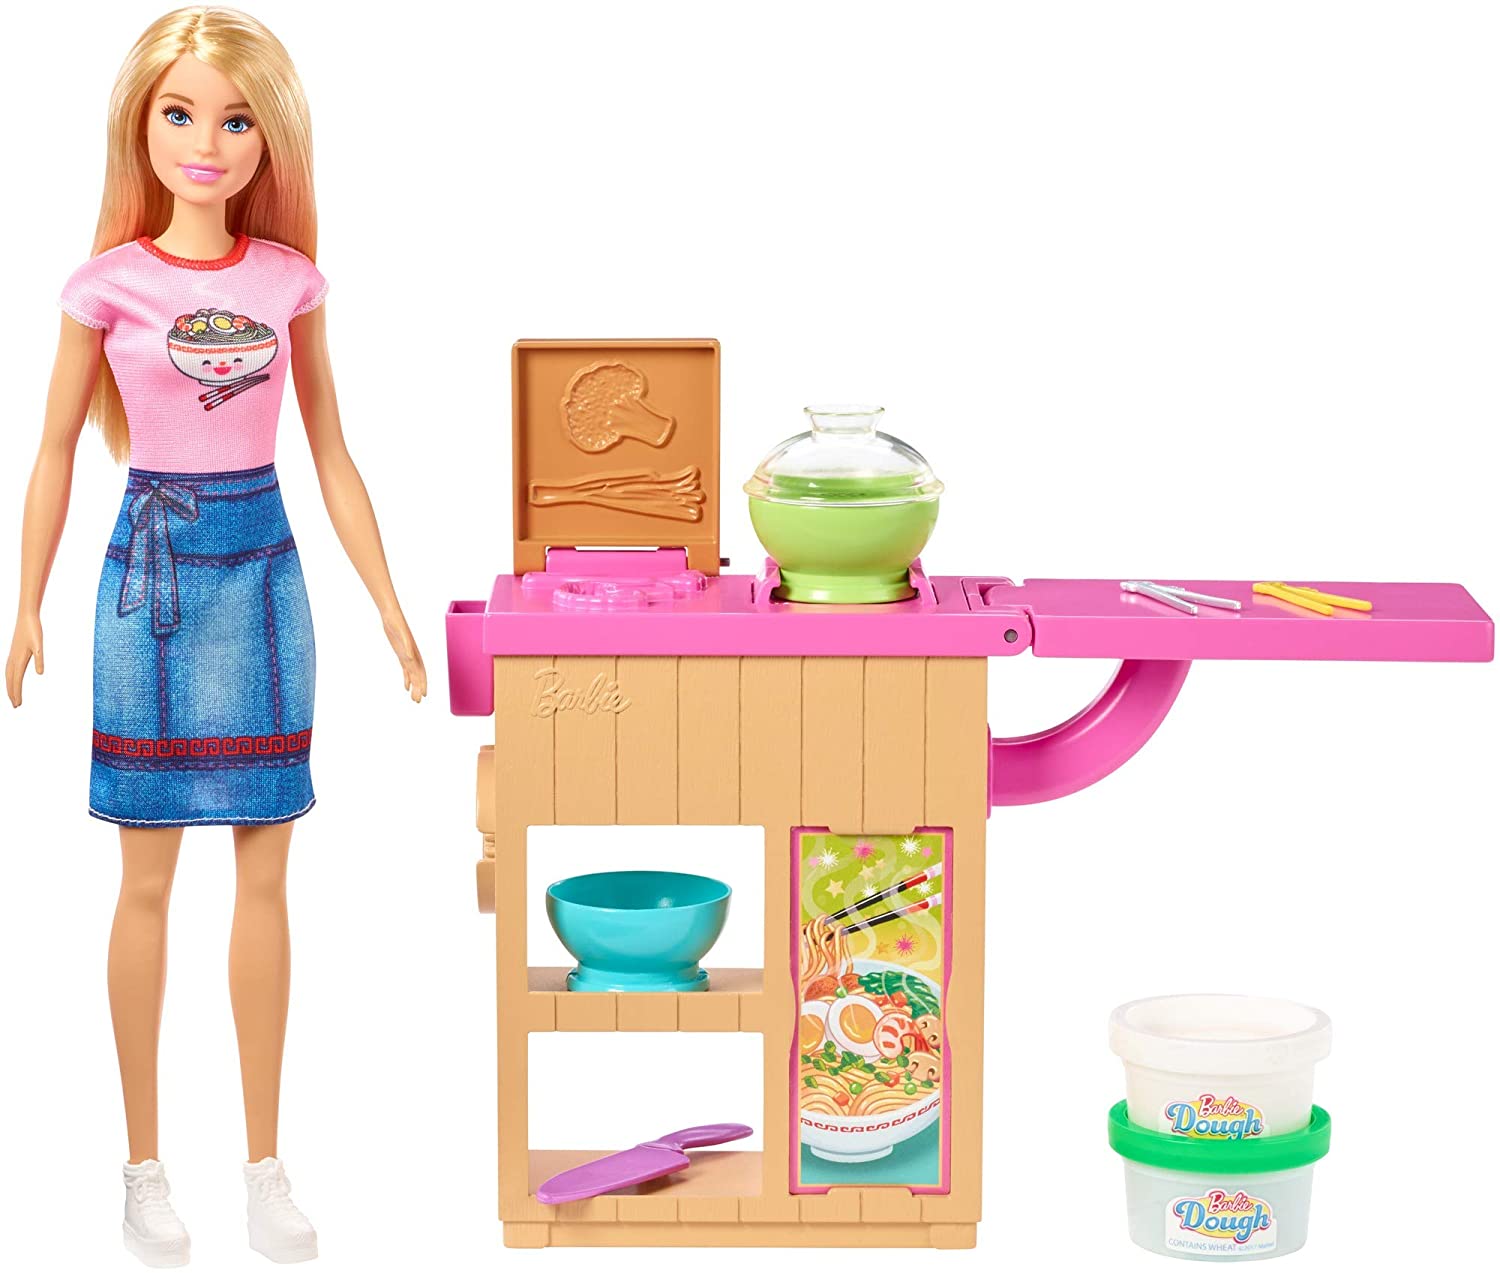 Barbie Ghk43 Pasta Playset With Doll (Blonde) And Work Area With Accessorie